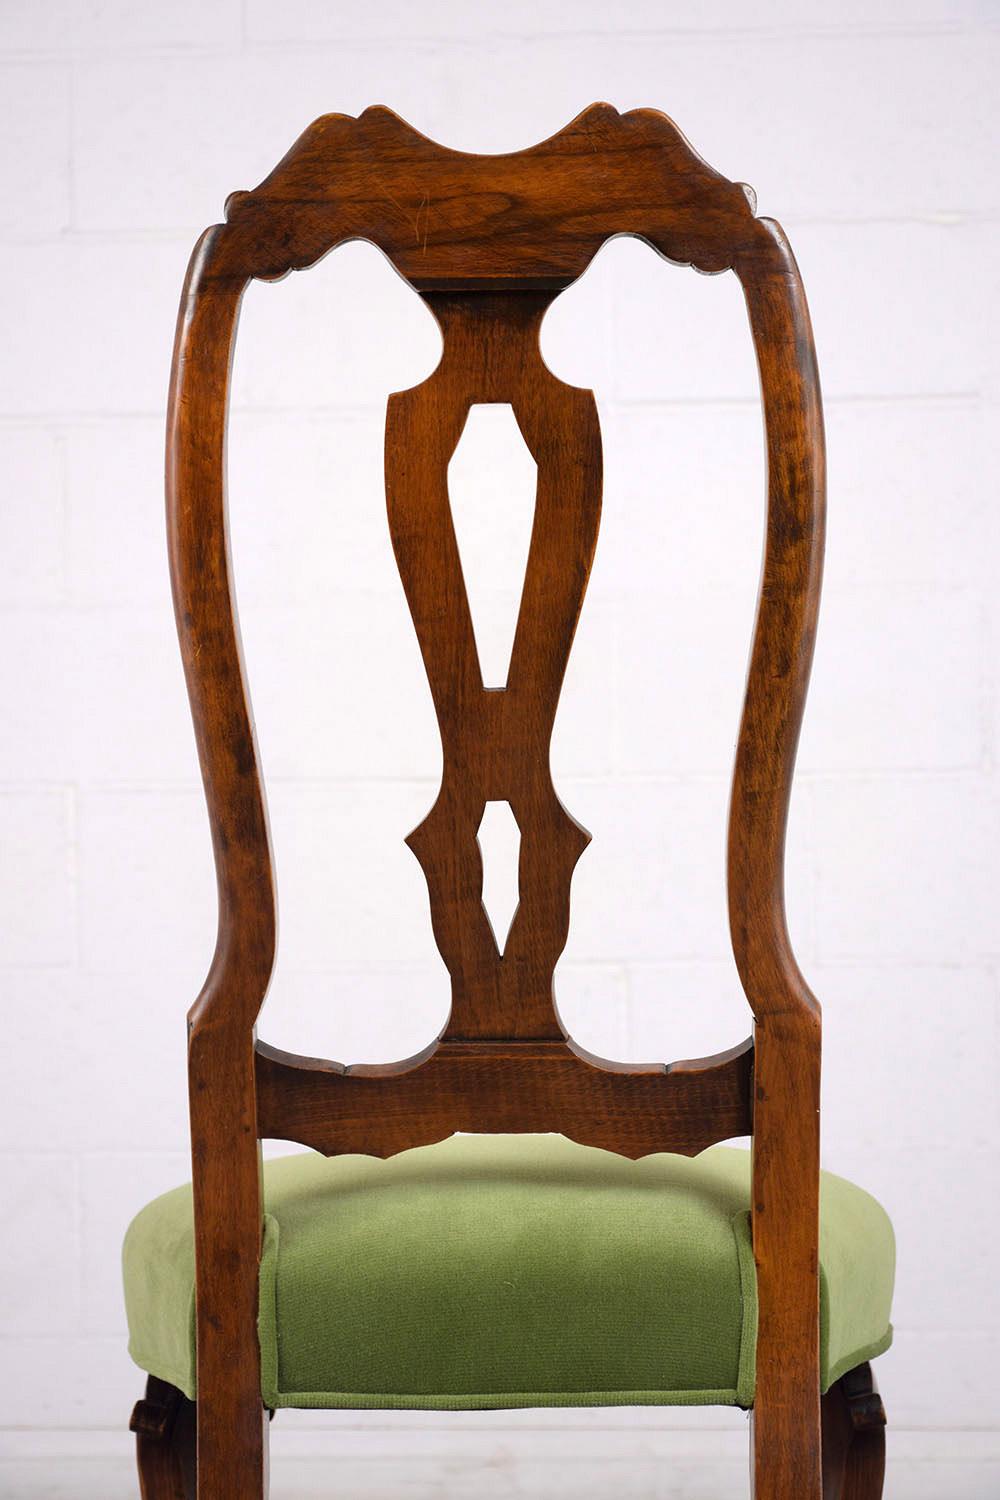 This set of six 1900s Regency style dining chairs feature high backs with hand carved frames with stretched legs stained a walnut color. The frames have carved details, completely restored seats with comfortable cushions, and have been